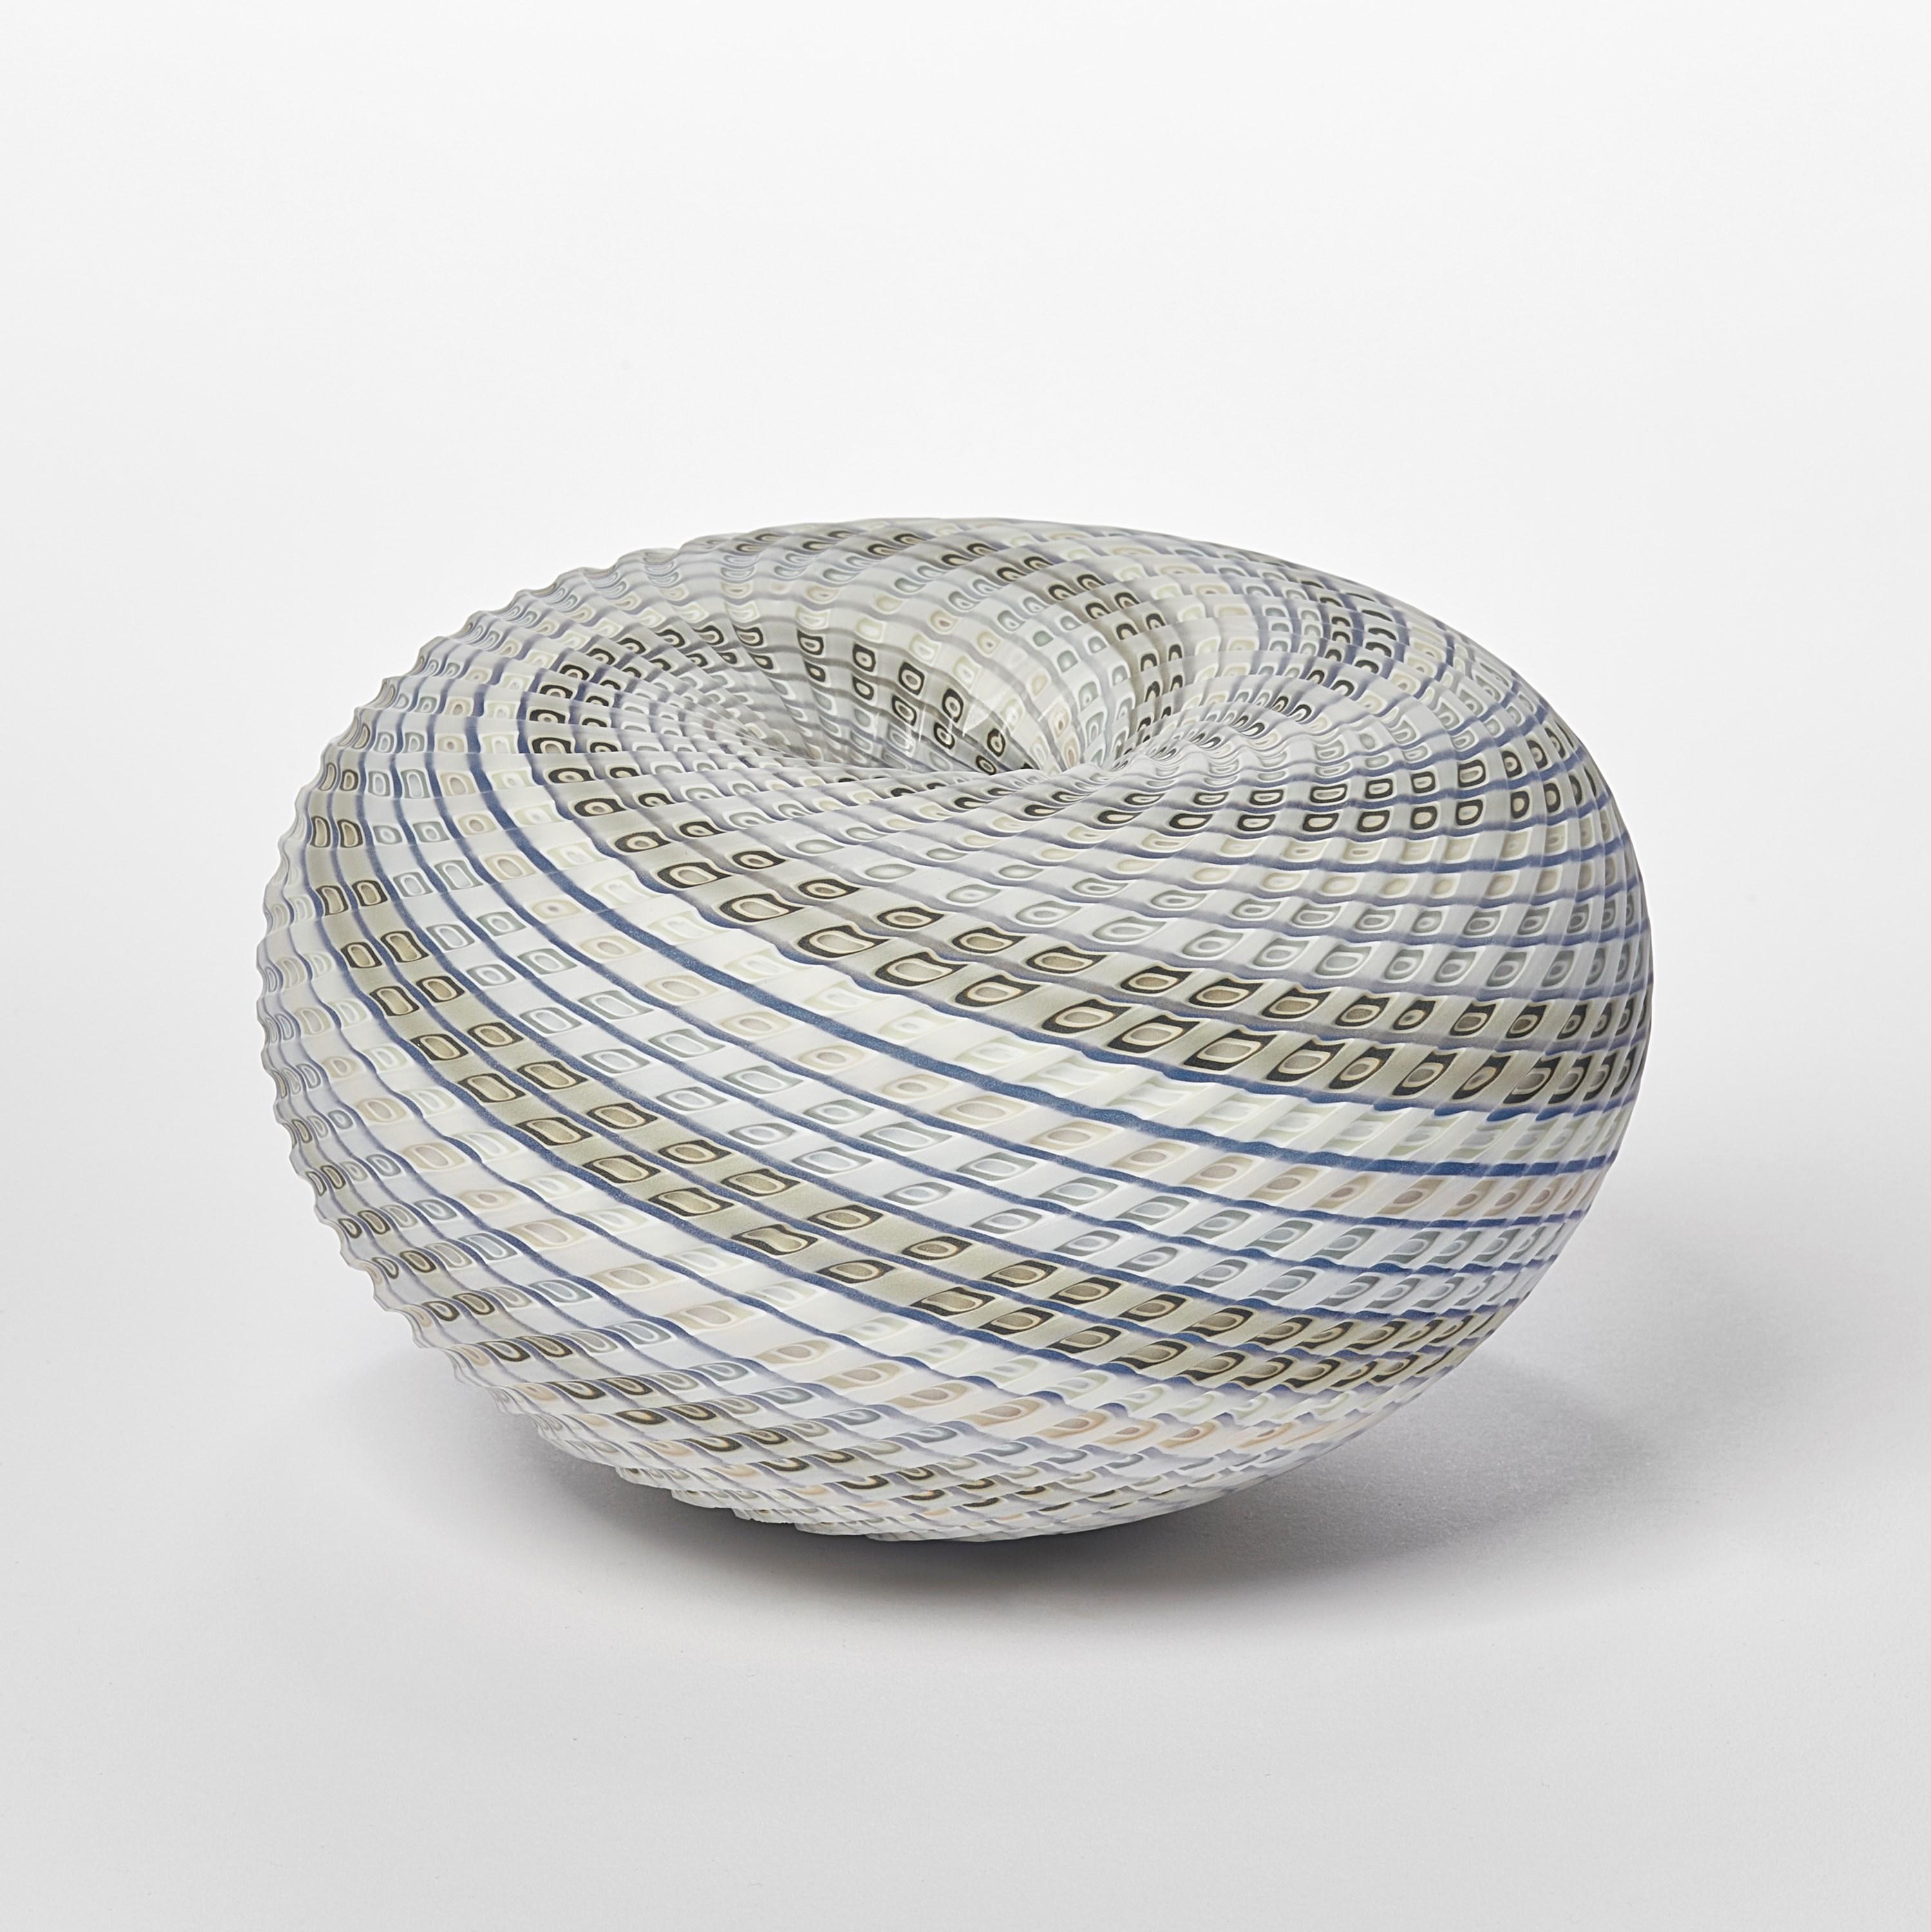 'Woven Three Tone Blue Basket' is a unique handblown, sculpted and cut glass sculpture by the British artist, Layne Rowe.

Rowe’s inspiration is drawn from the dramatic Devon coastline which informs his love for detail, a constant theme for his